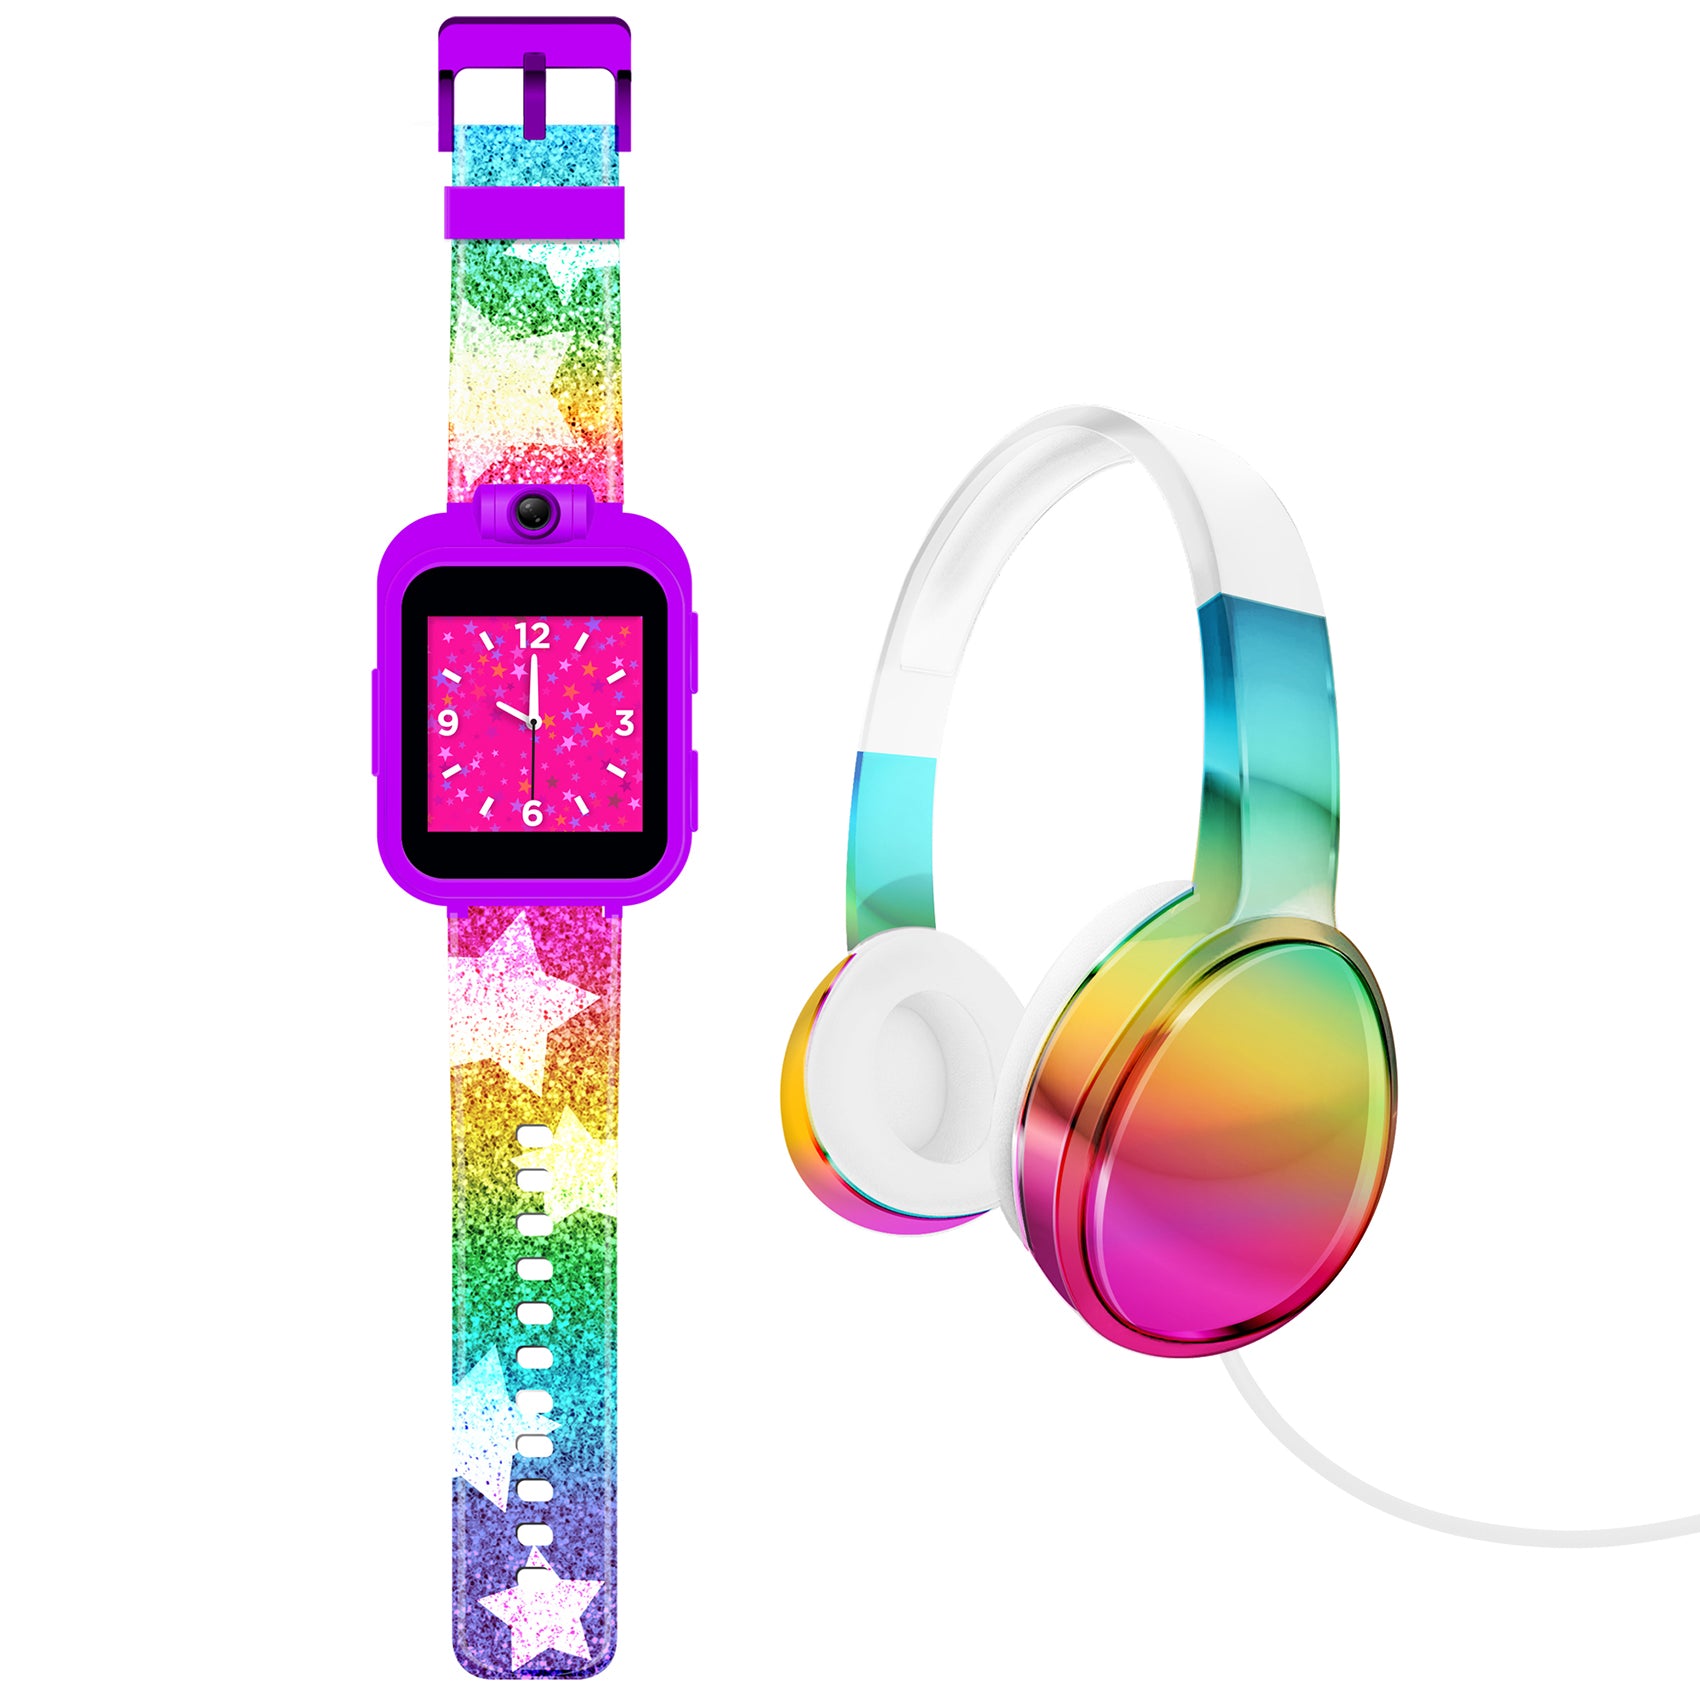 PlayZoom 2 Kids Smartwatch with Headphones: Rainbow Star Print affordable smart watch with headphones